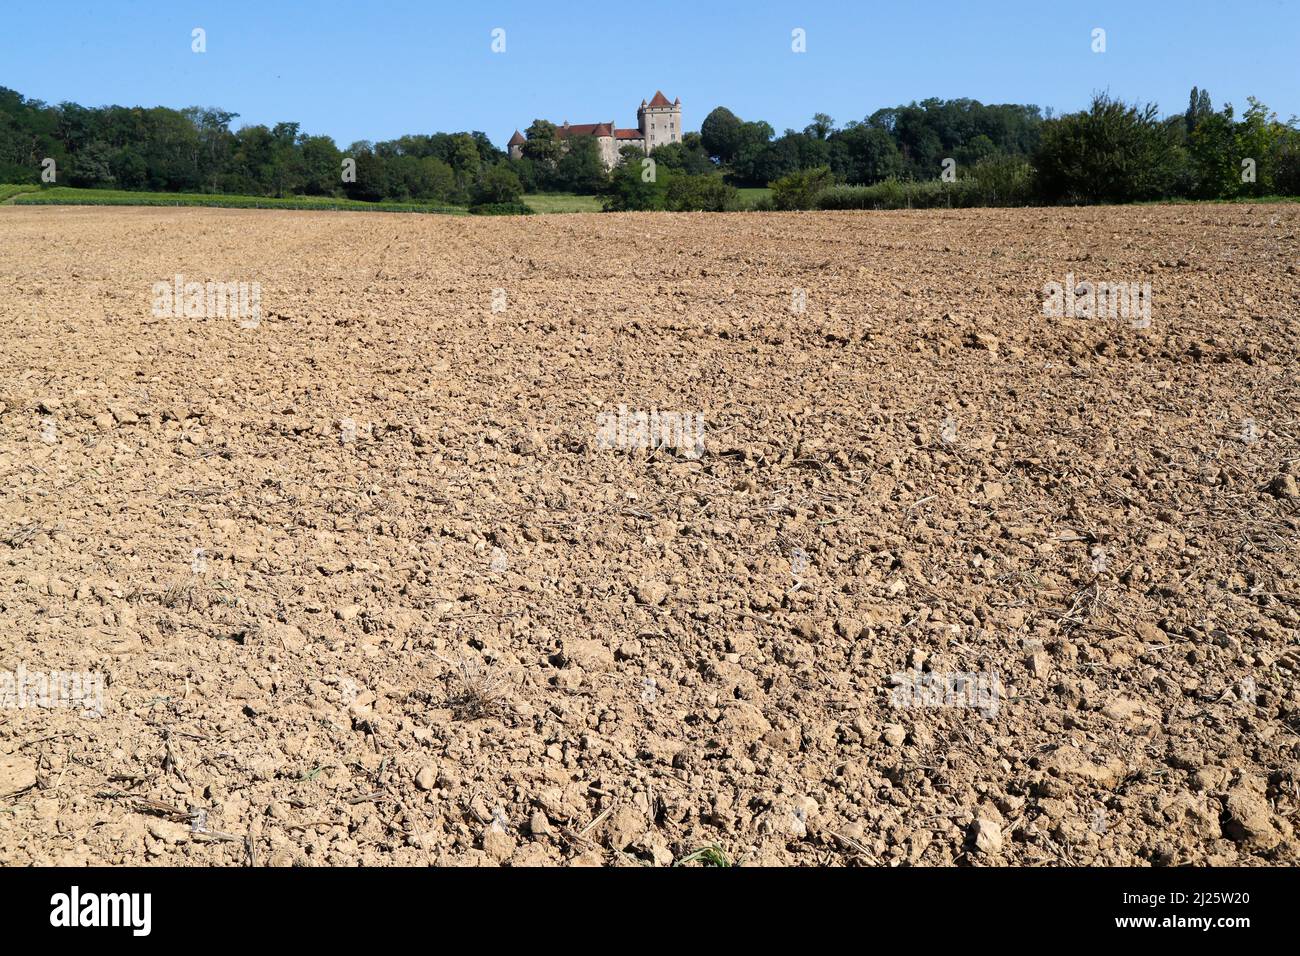 Lanscape in Jura with french old castle.  Field and agriculture. Stock Photo